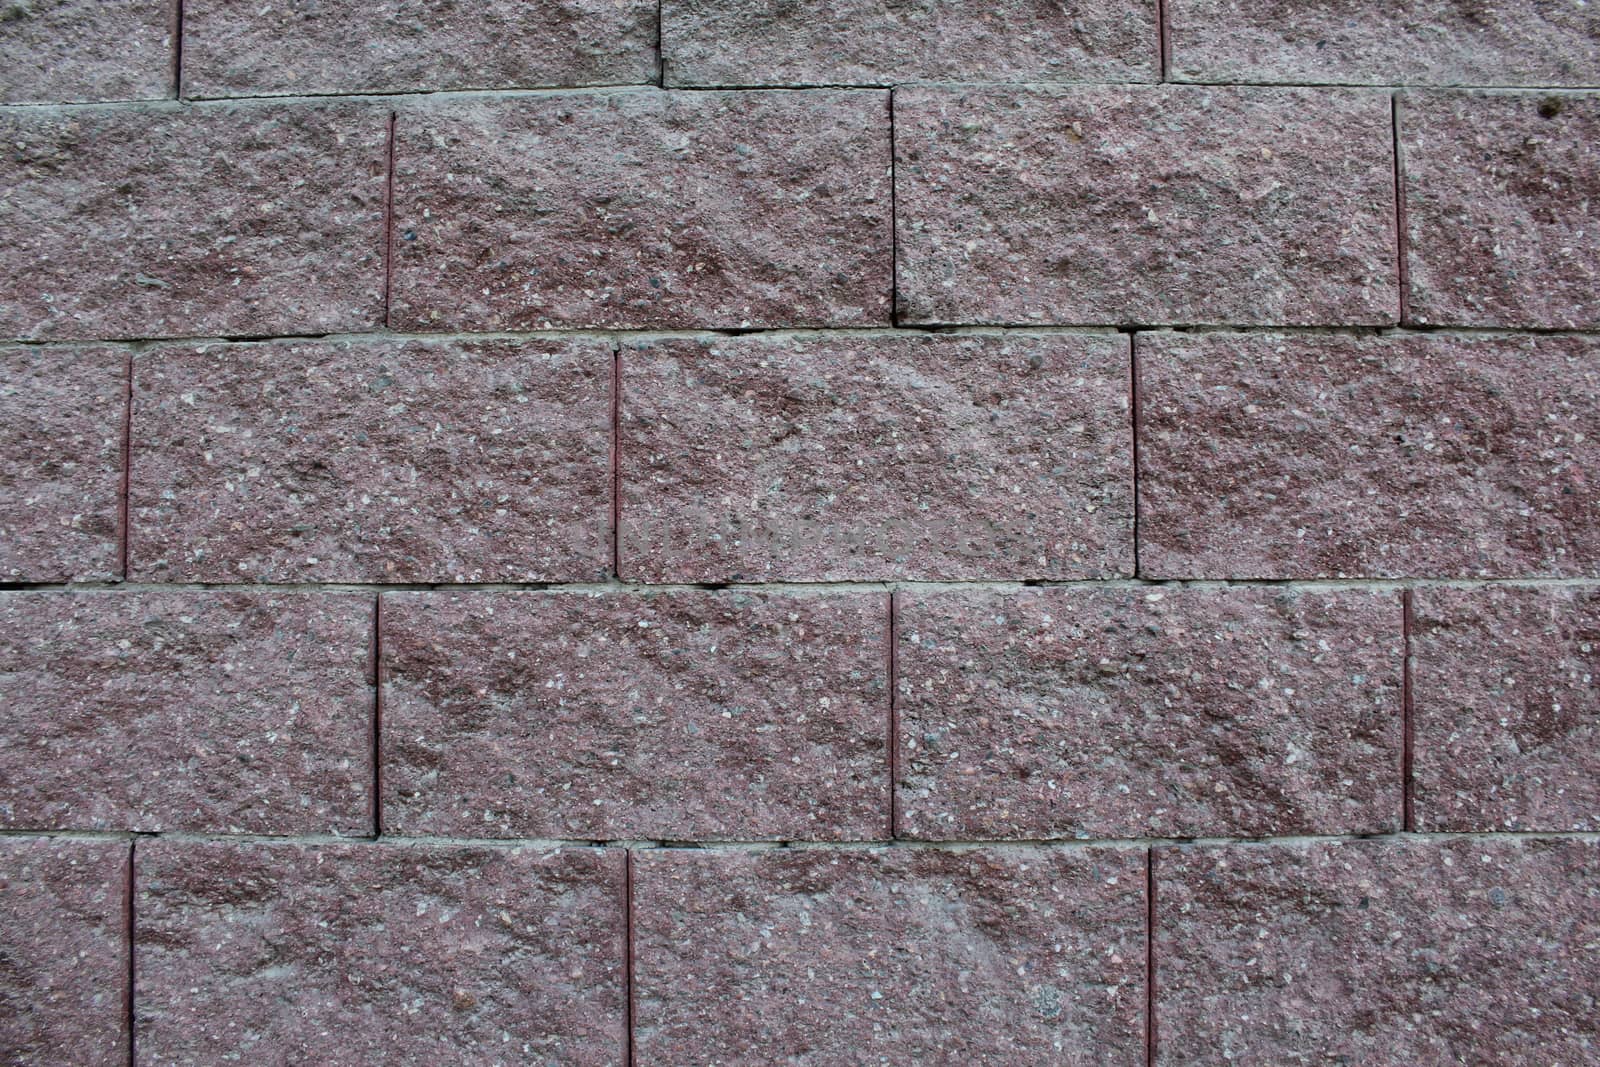 Brick wall texture for background.